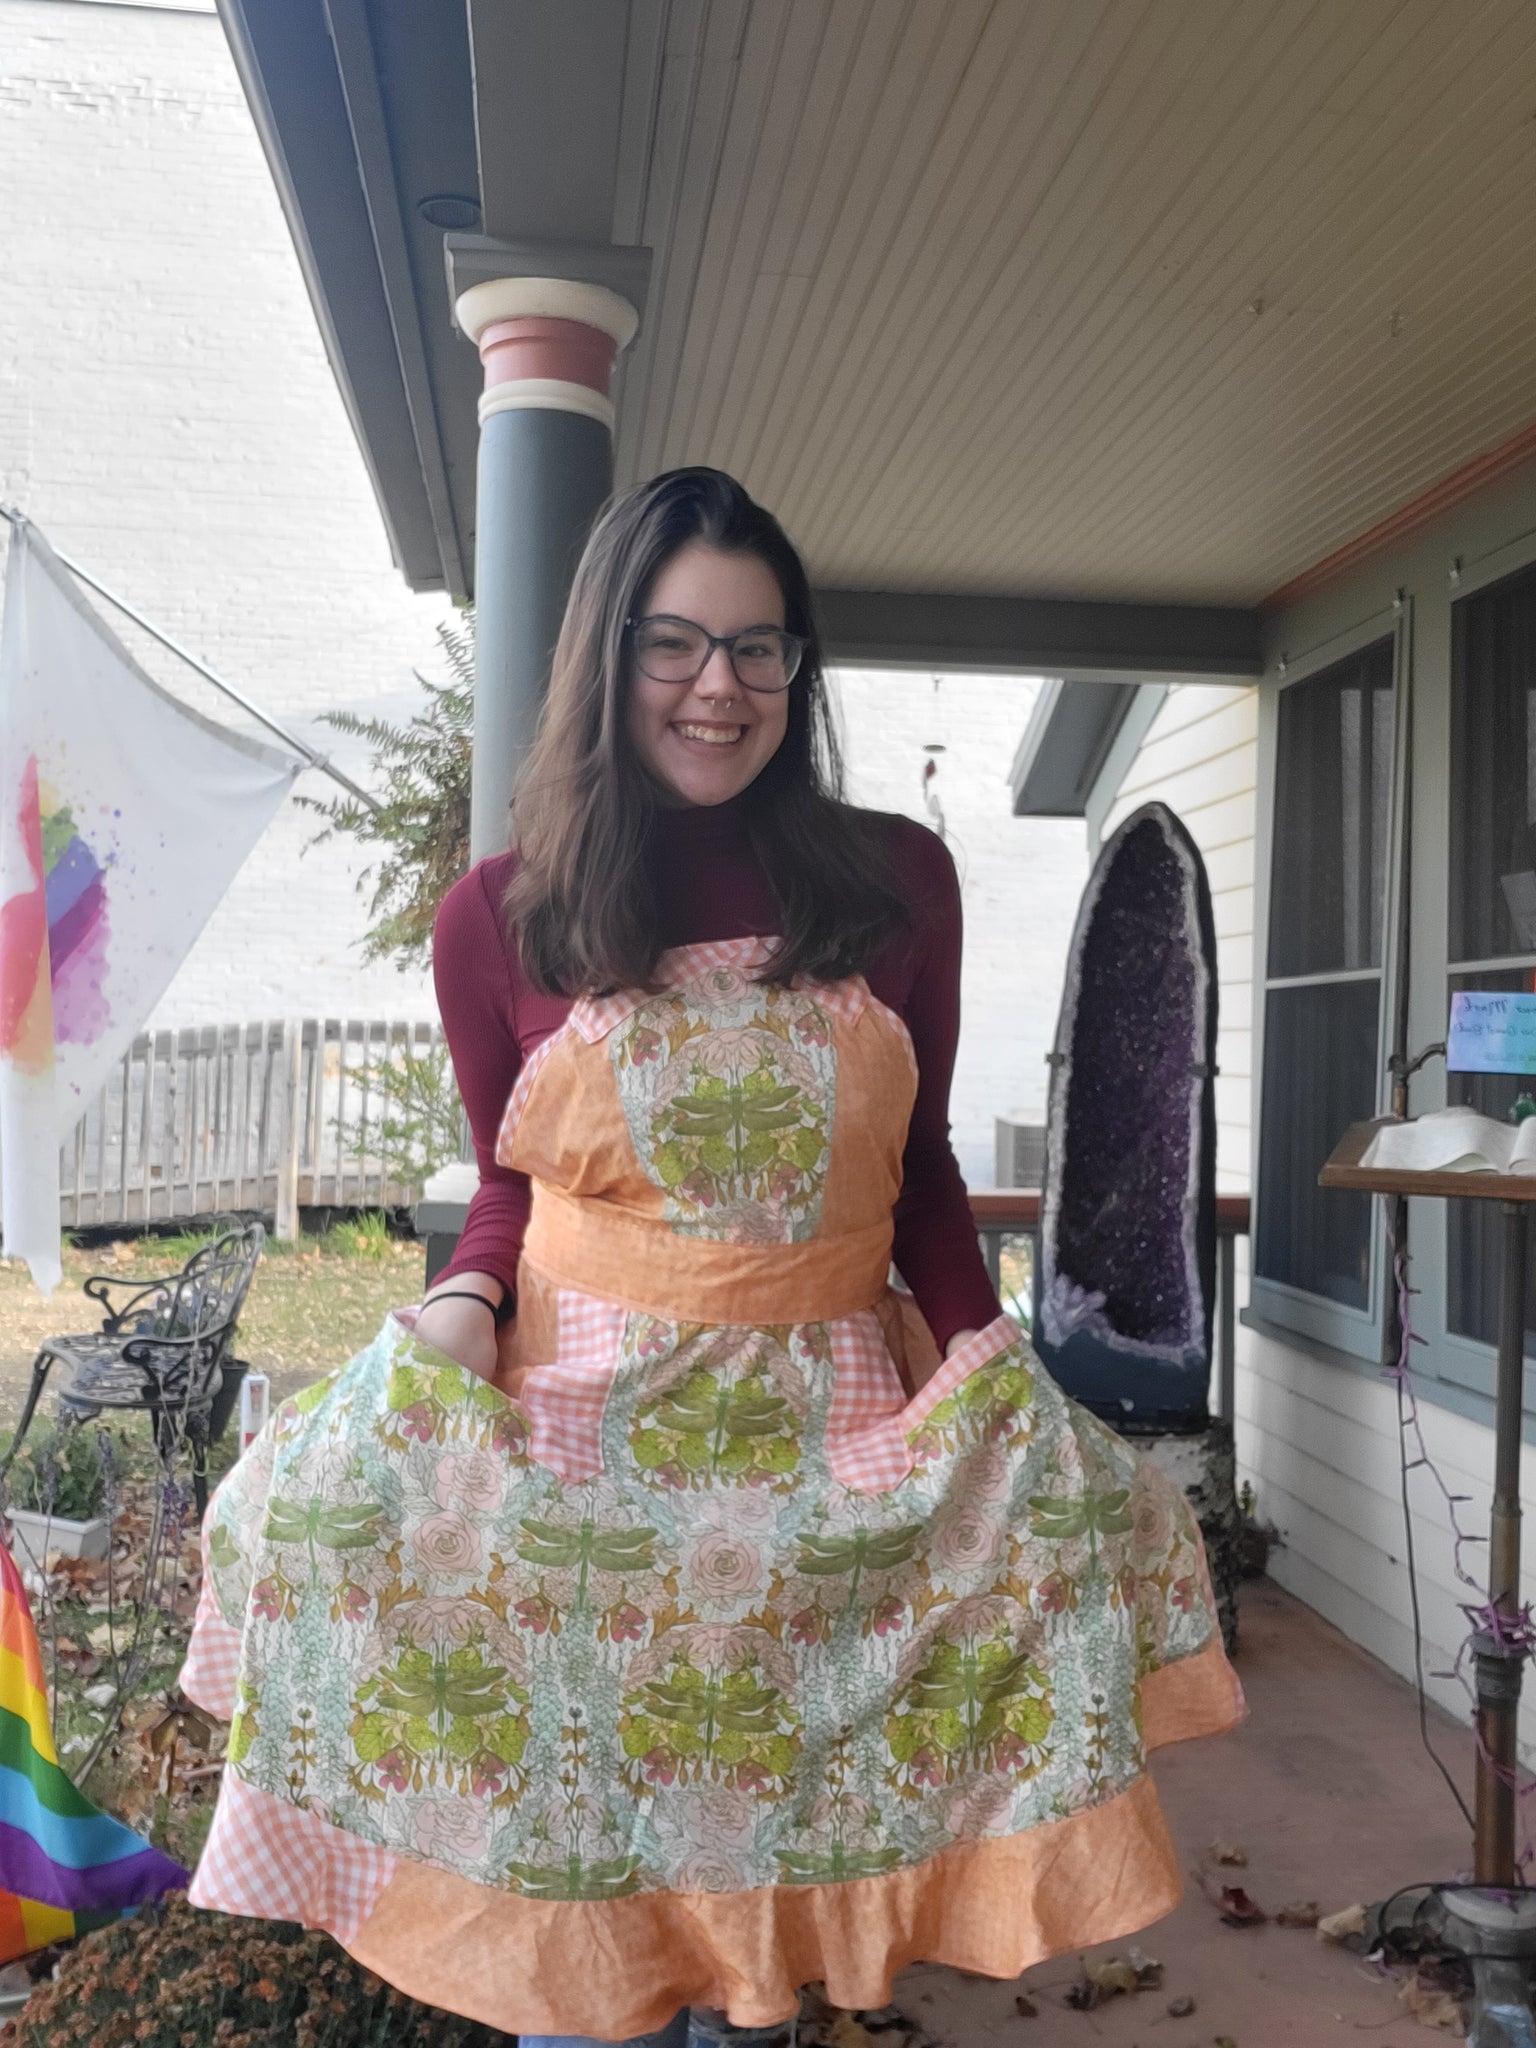 “Emerald Dragonfly” - Full Apron by Mikaela Benner